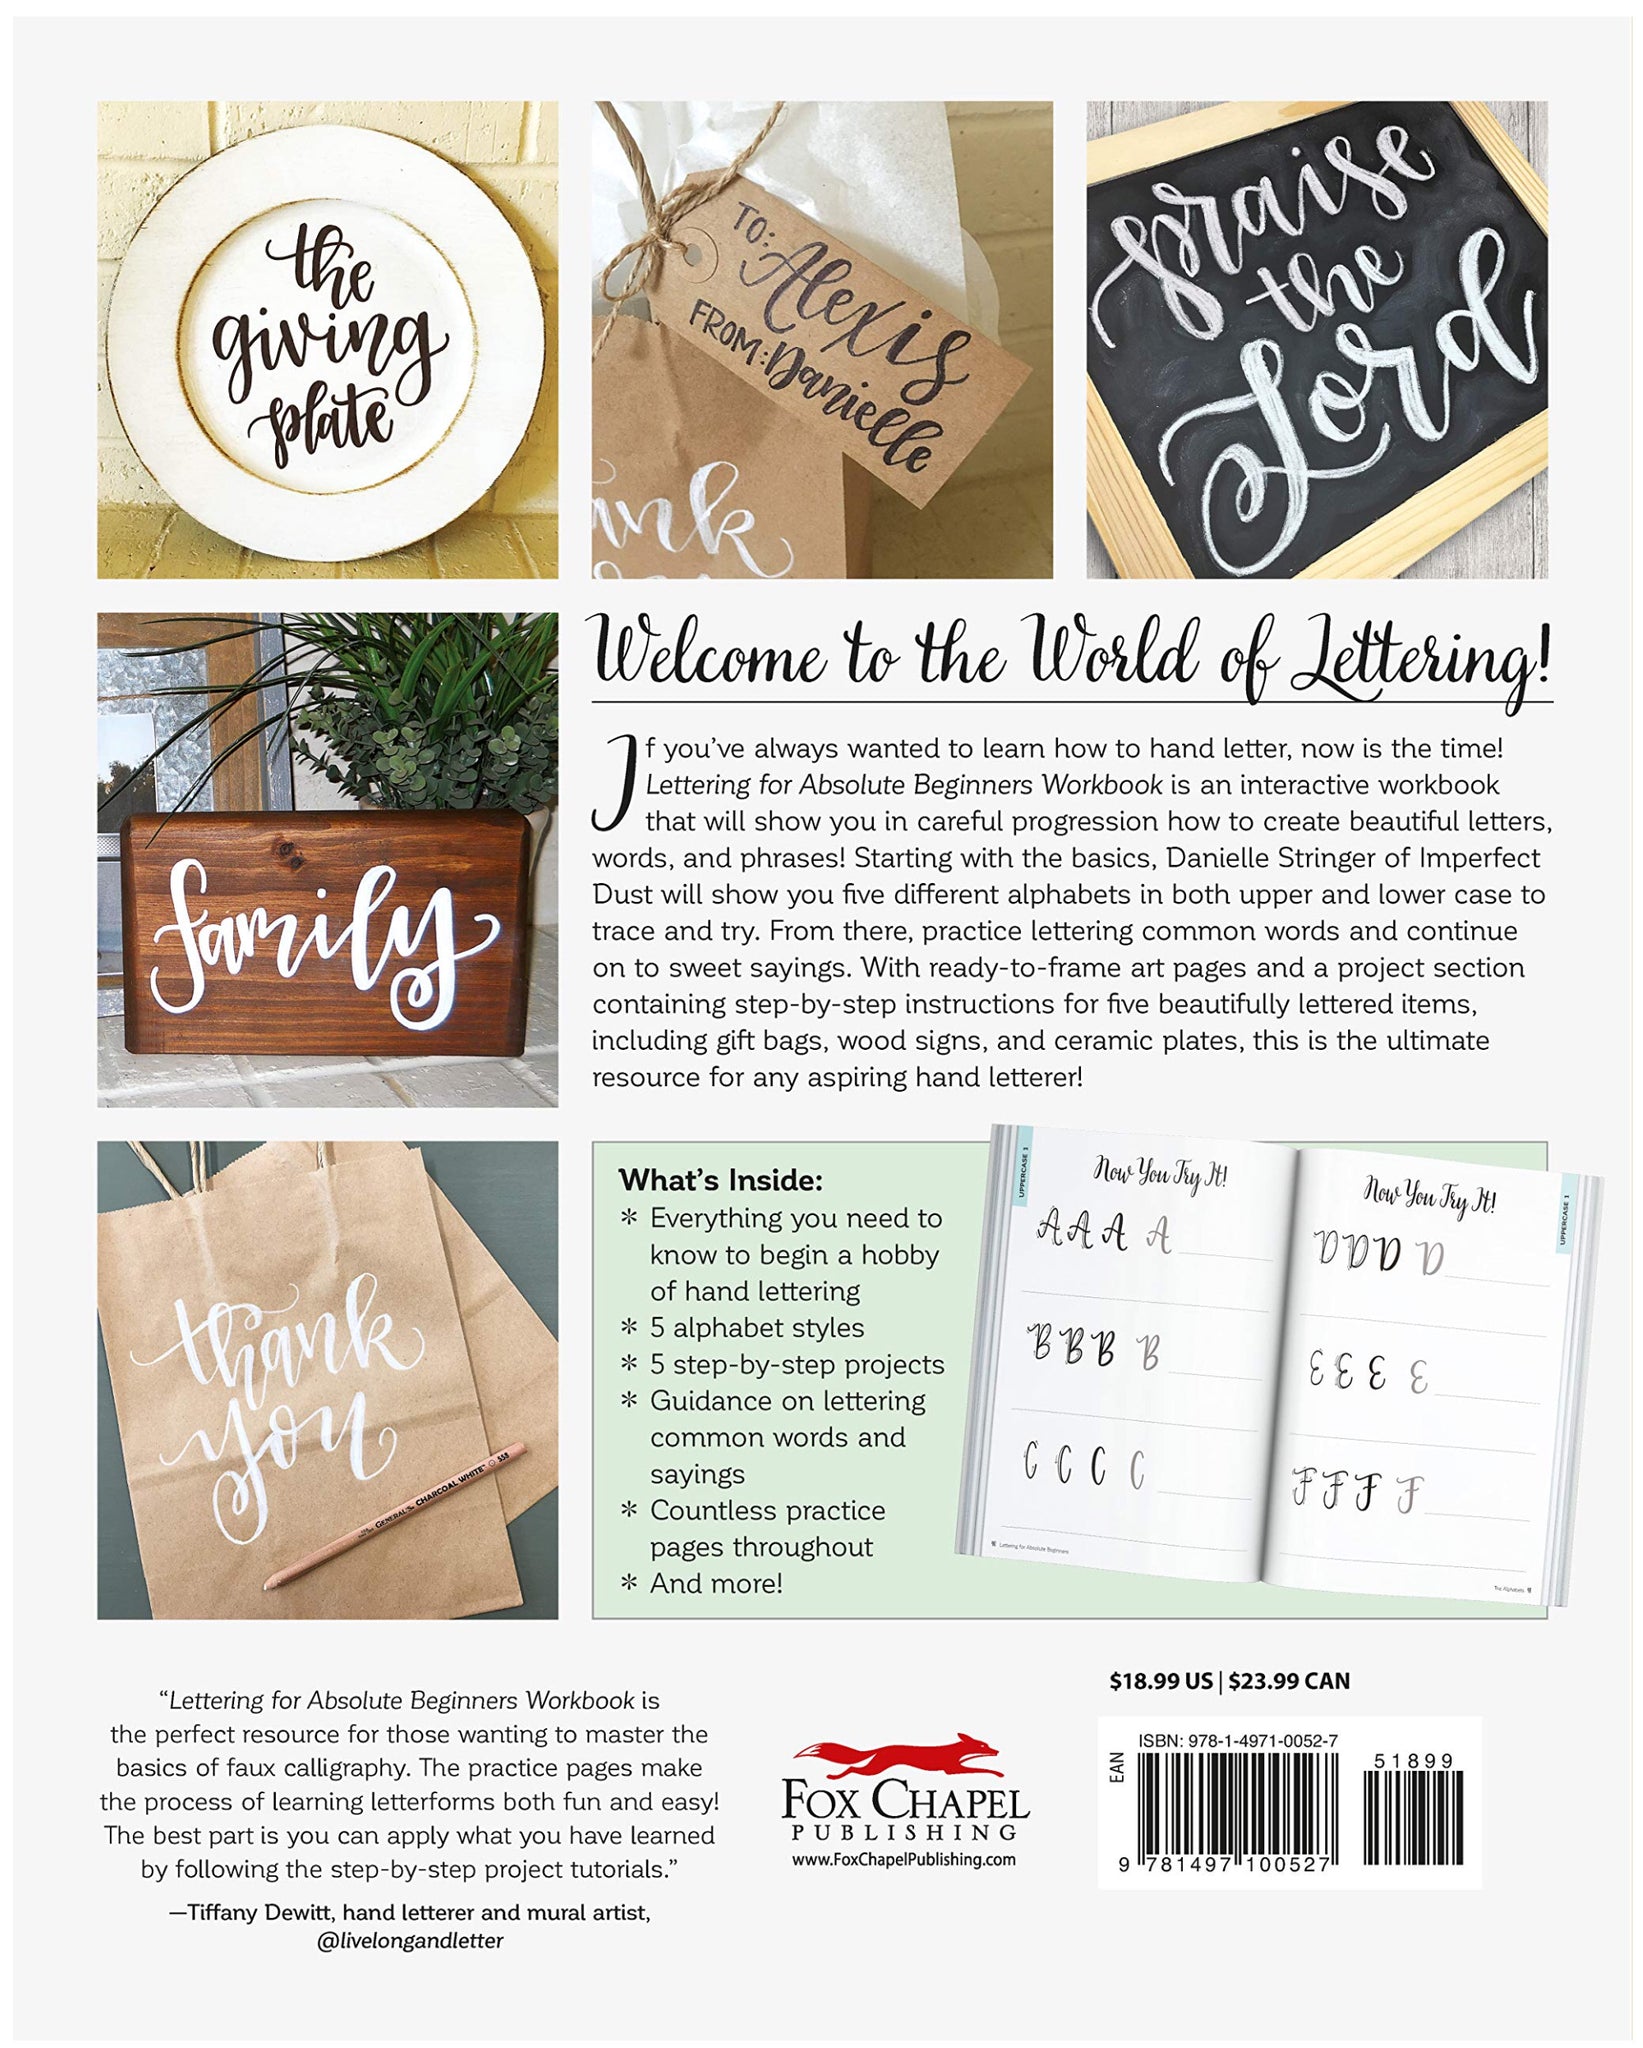 Lettering For Absolute Beginners Workbook – Imperfect Dust